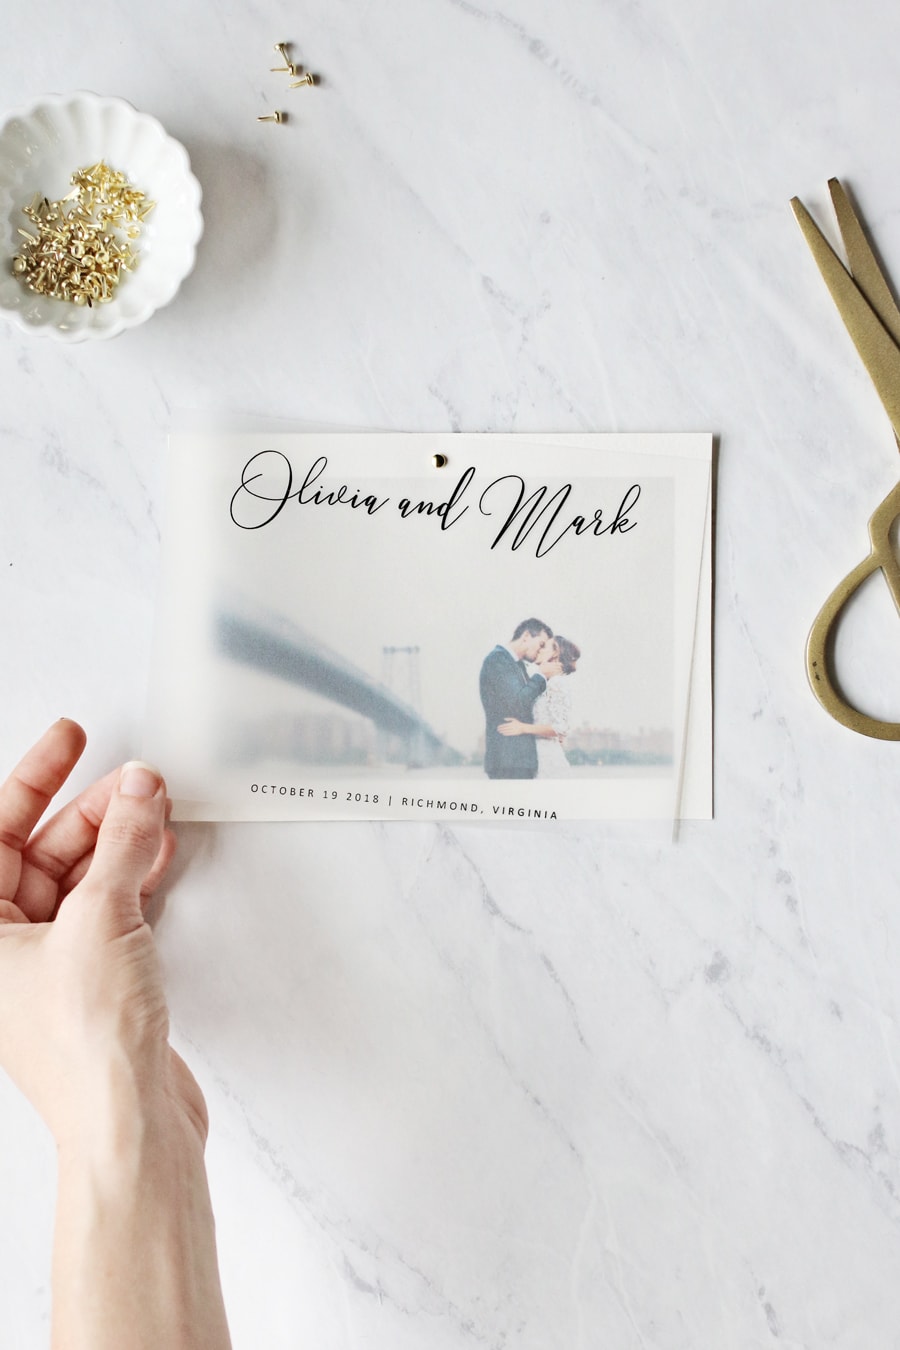 Think you can't make gorgeous save the dates at home? Use one of our free templates to make these vellum save the dates. We promise your guests will love them.